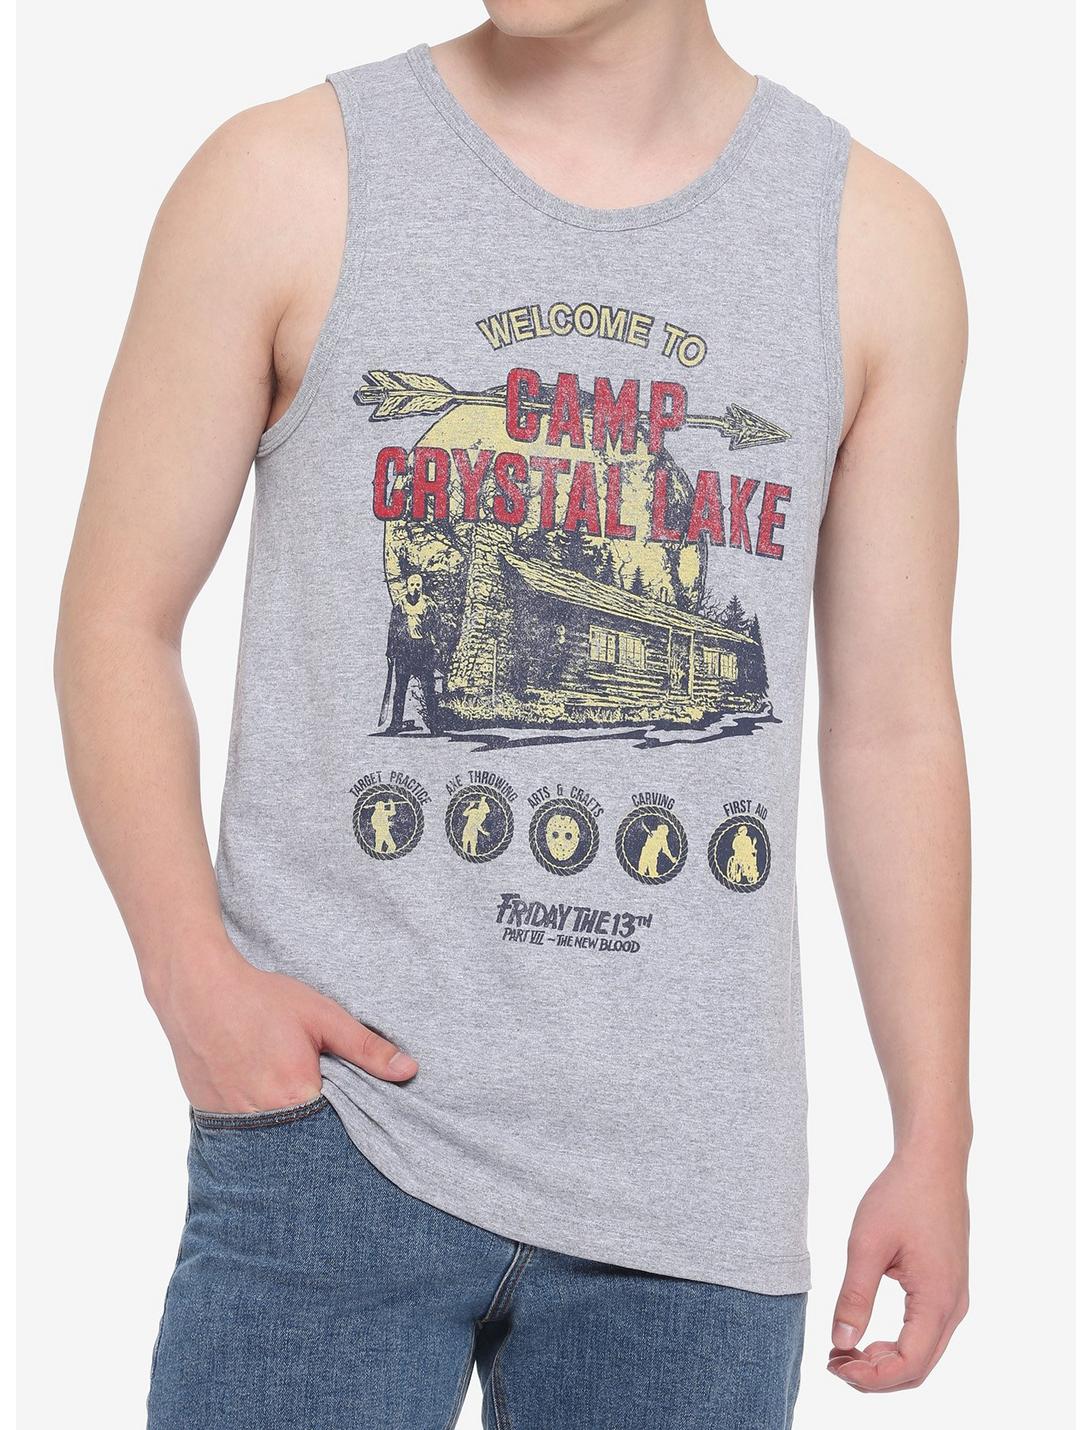 Friday The 13th Part VII: The New Blood Camp Crystal Lake Activities Tank Top, MULTI, hi-res